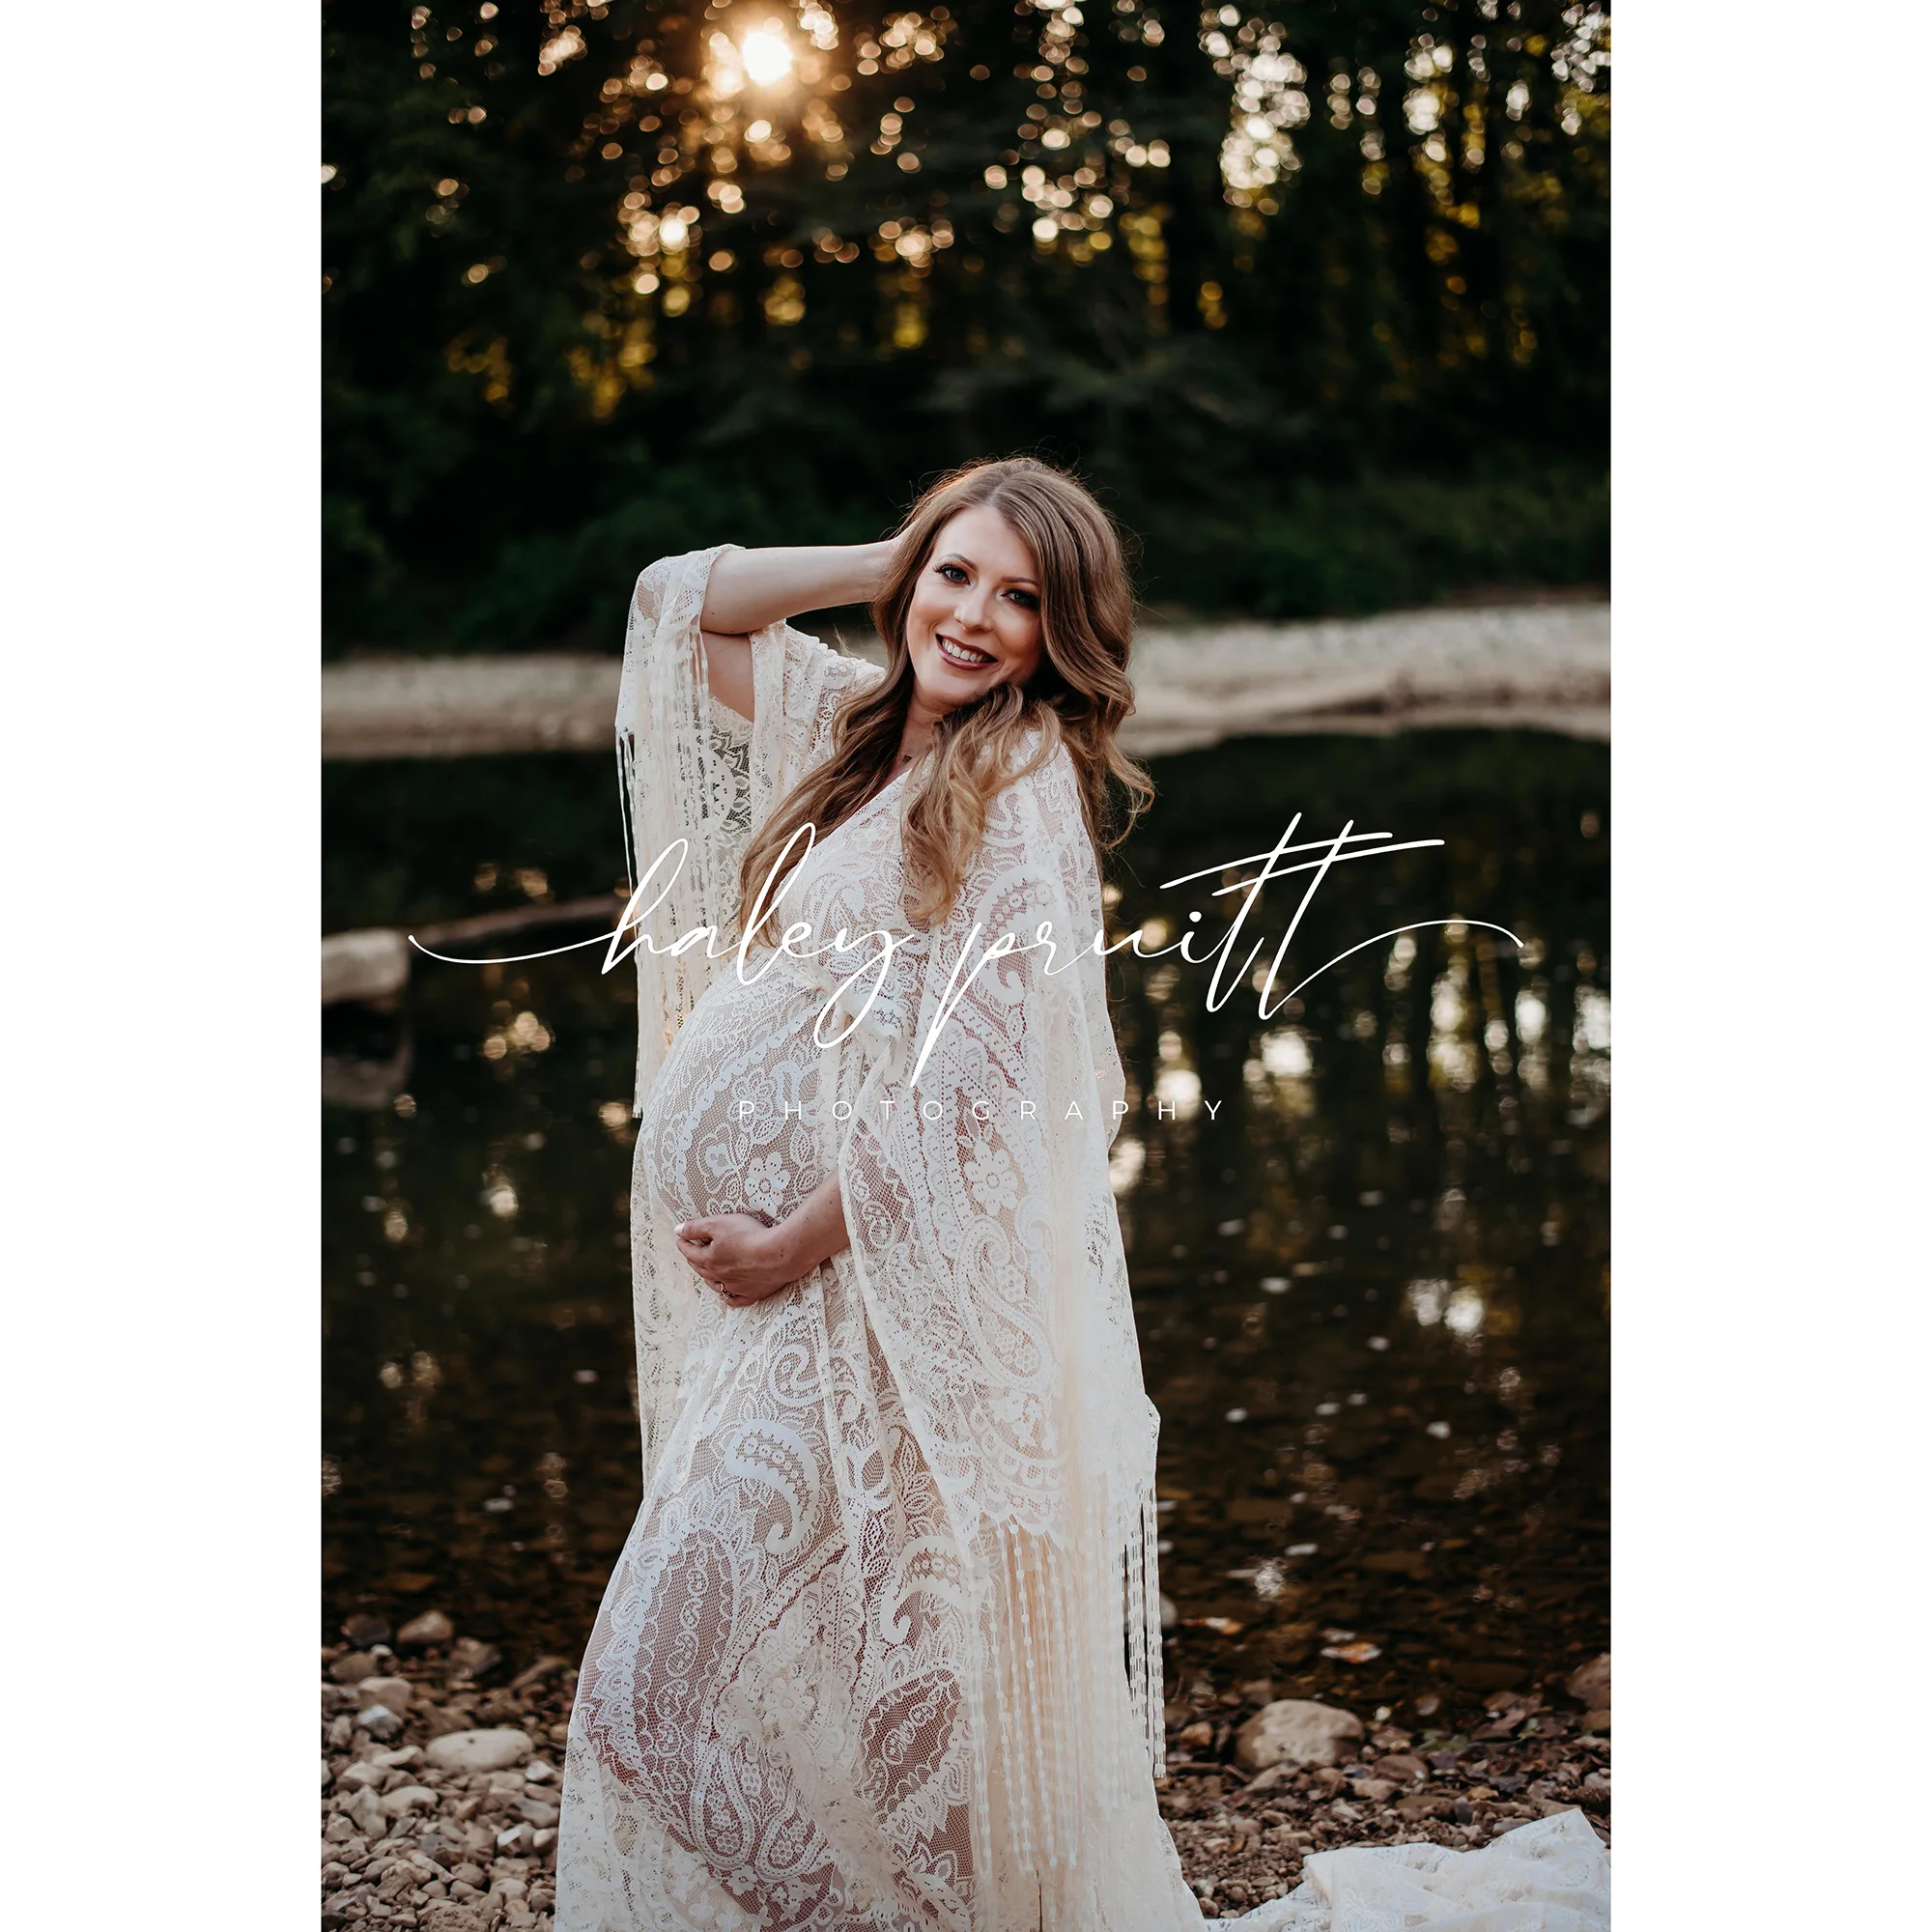 Photo Shoot Props Maternity Dress Boho Pregnant Floral Lace Gown Maxi Robe for Woman Photography Accessories Baby Shower Gift enlarge